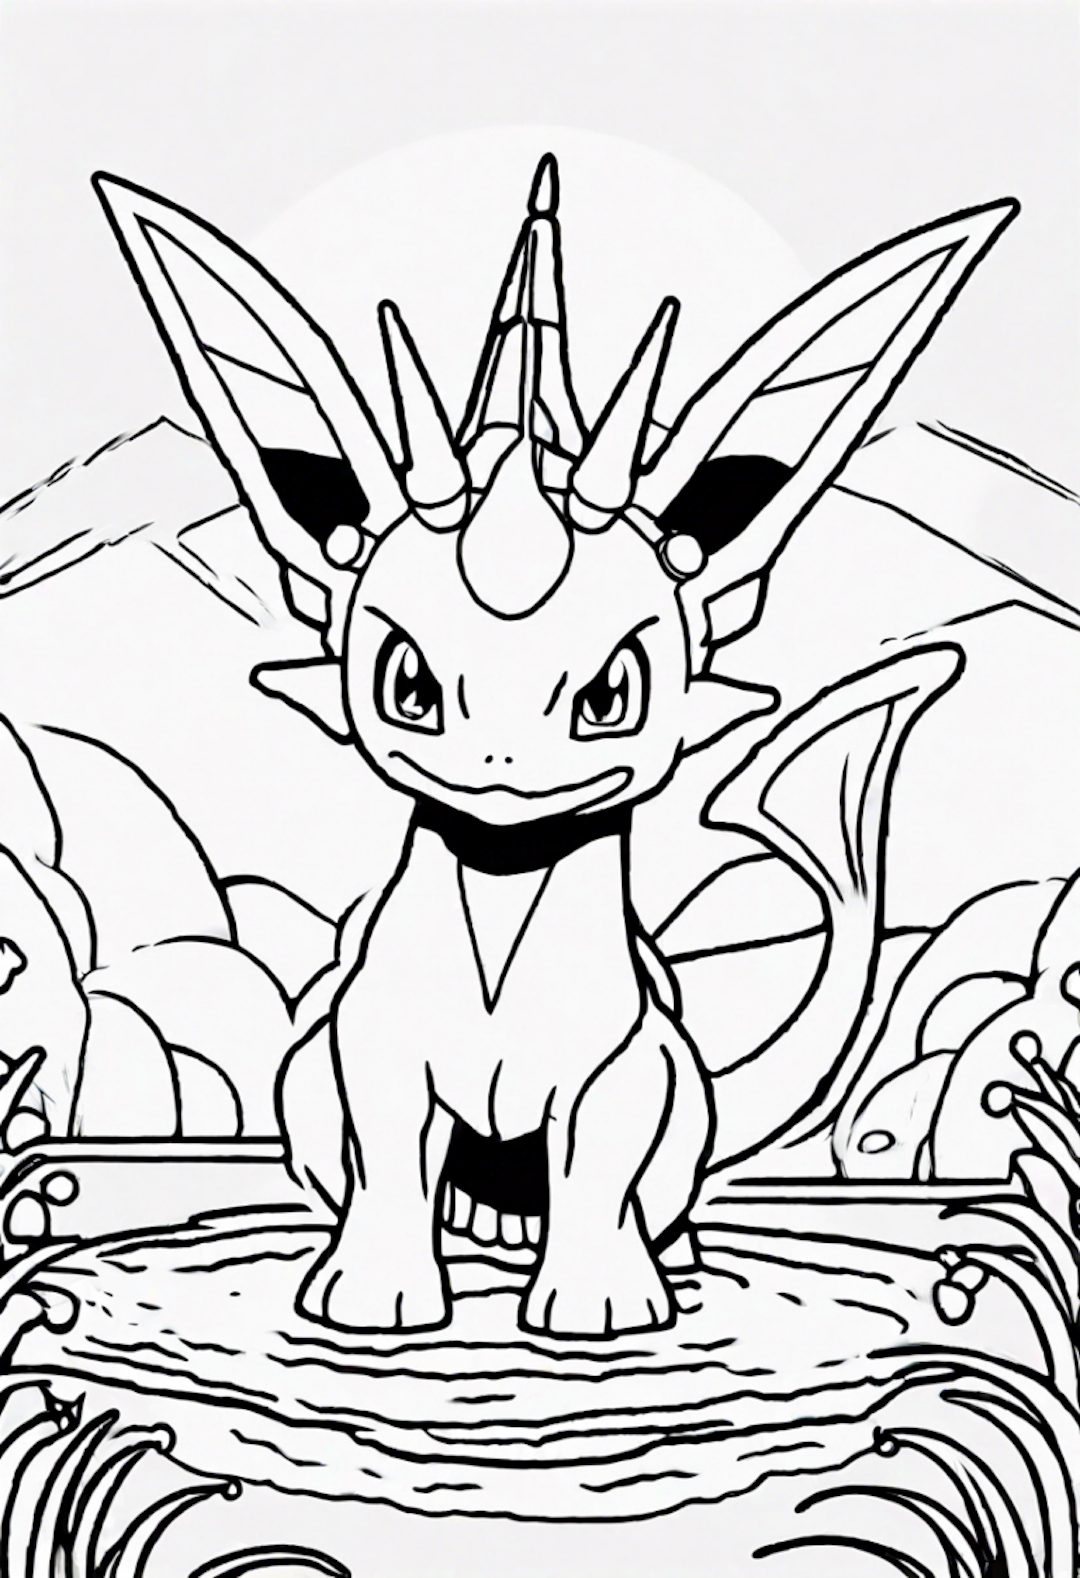 Vaporeon in Tranquil Waters Coloring Page coloring pages